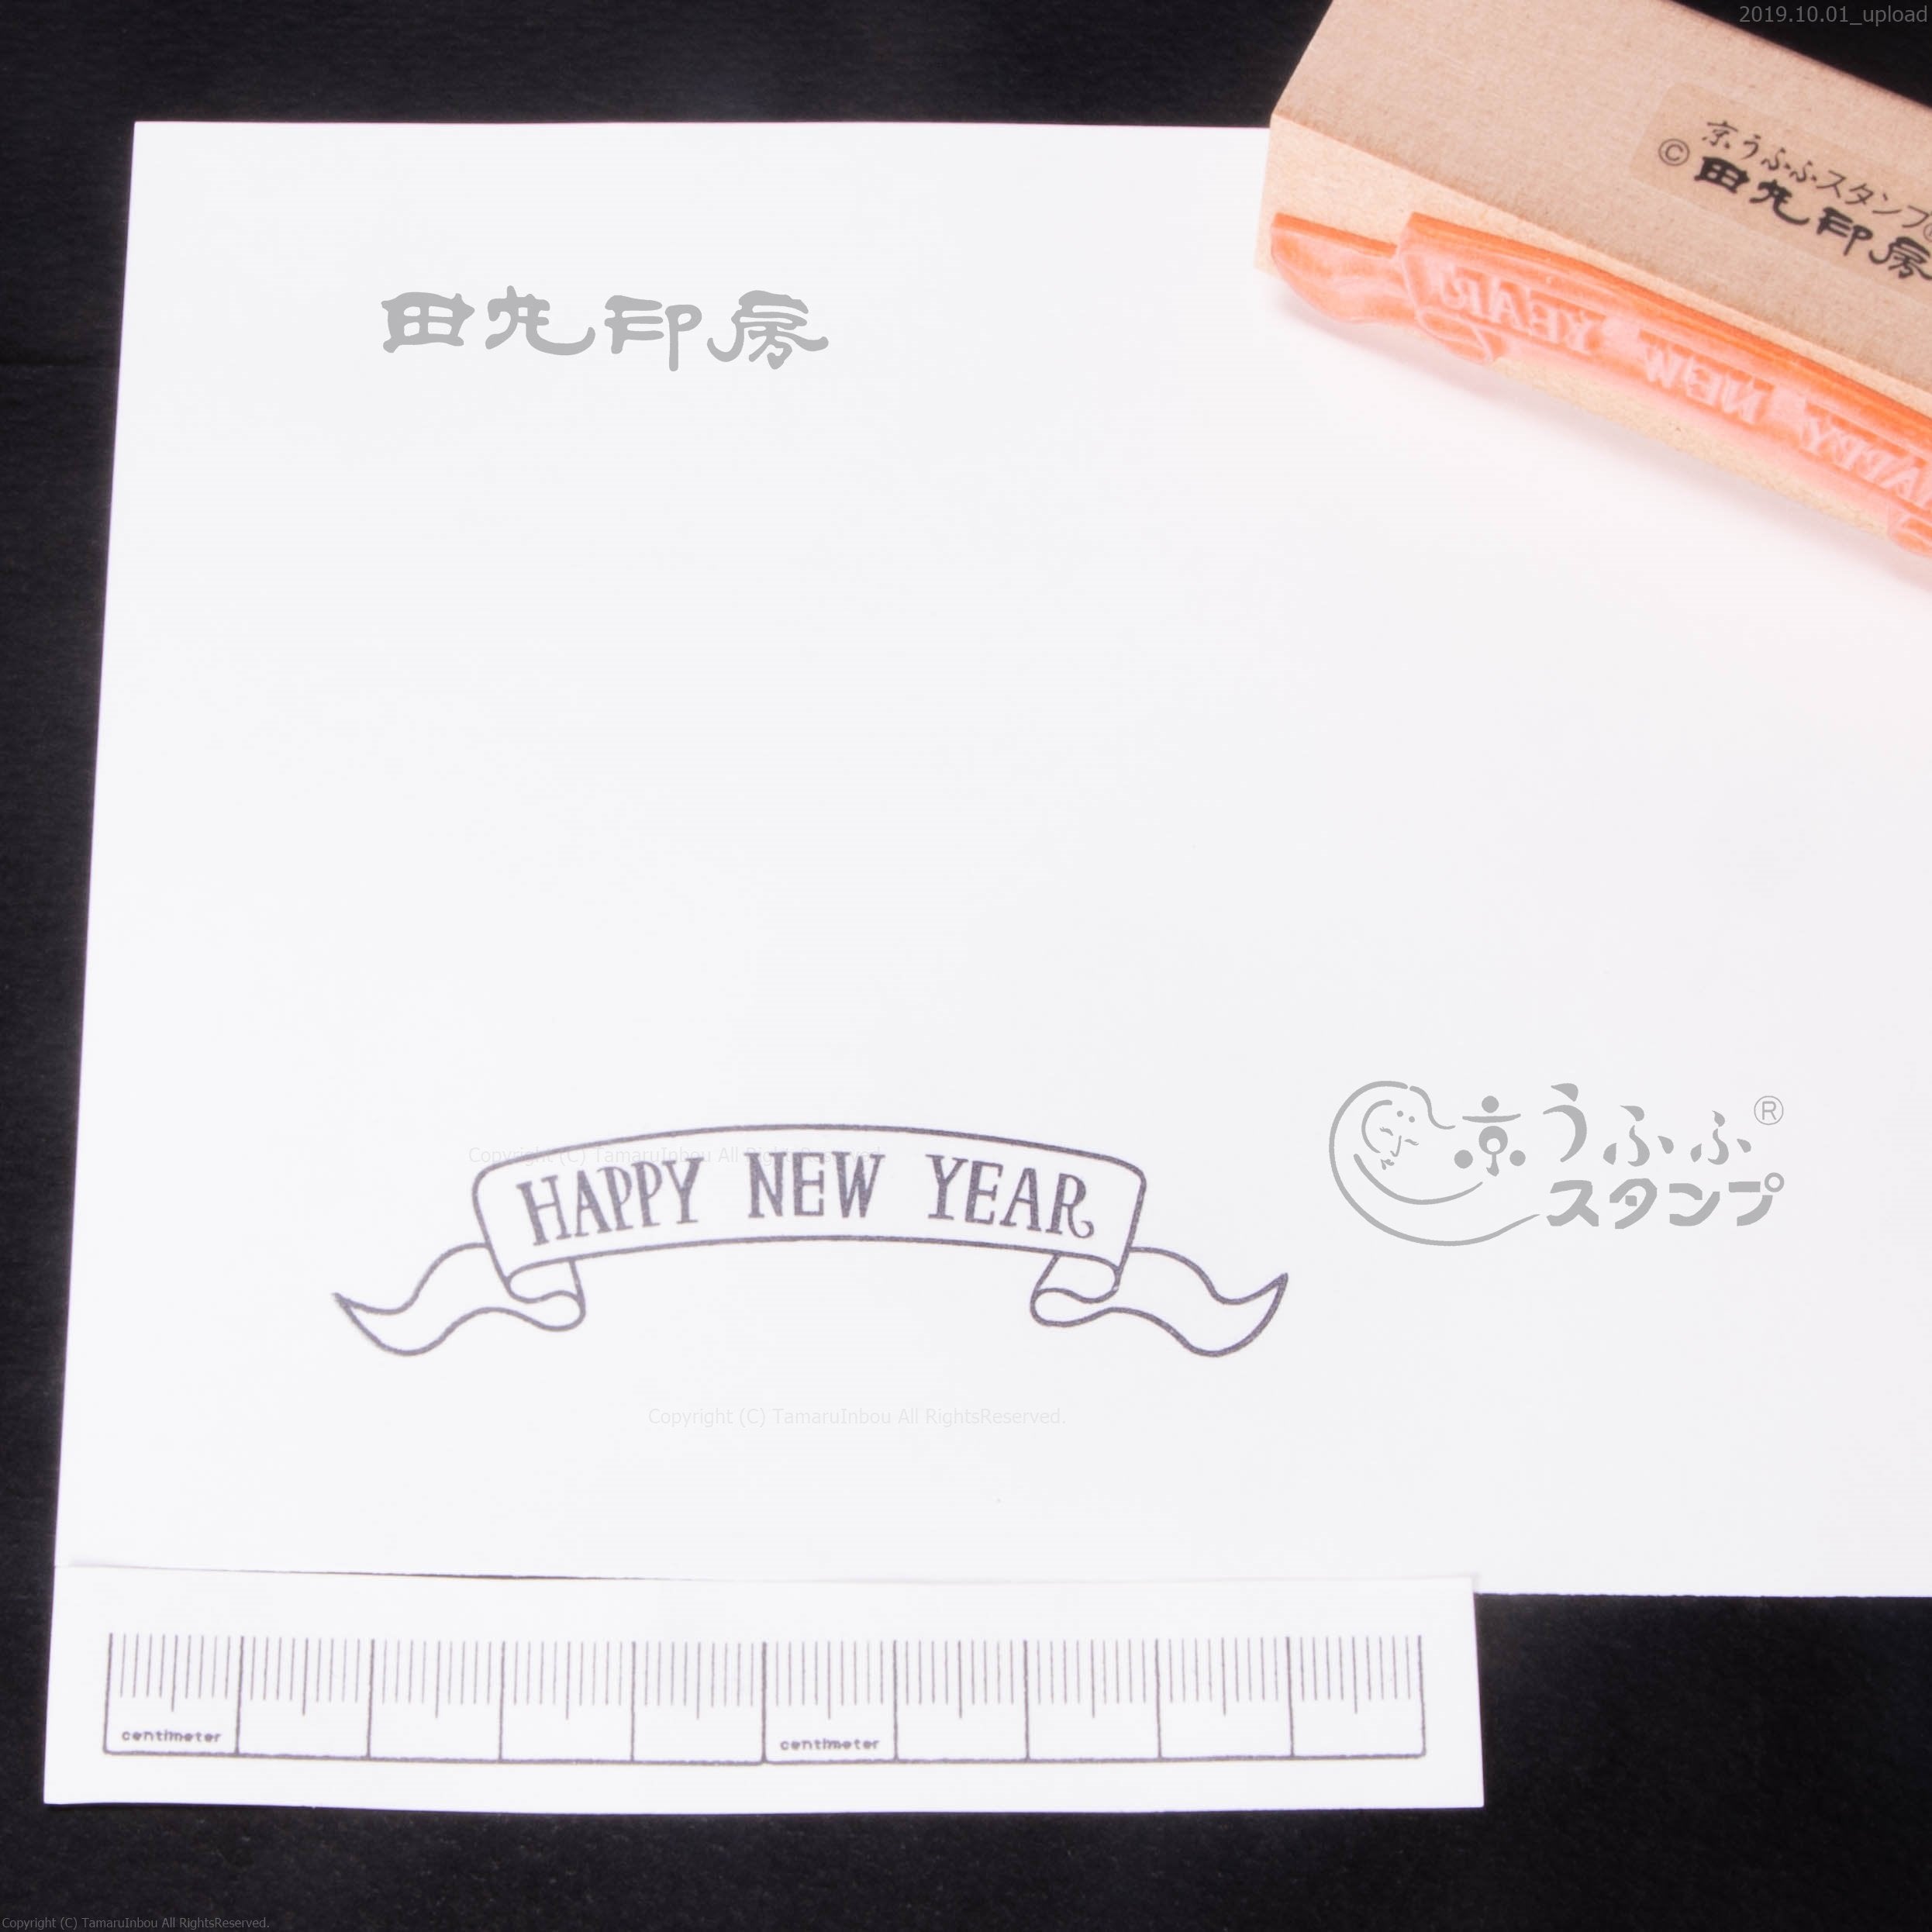 ) which there is no NewYear ribbon (A in